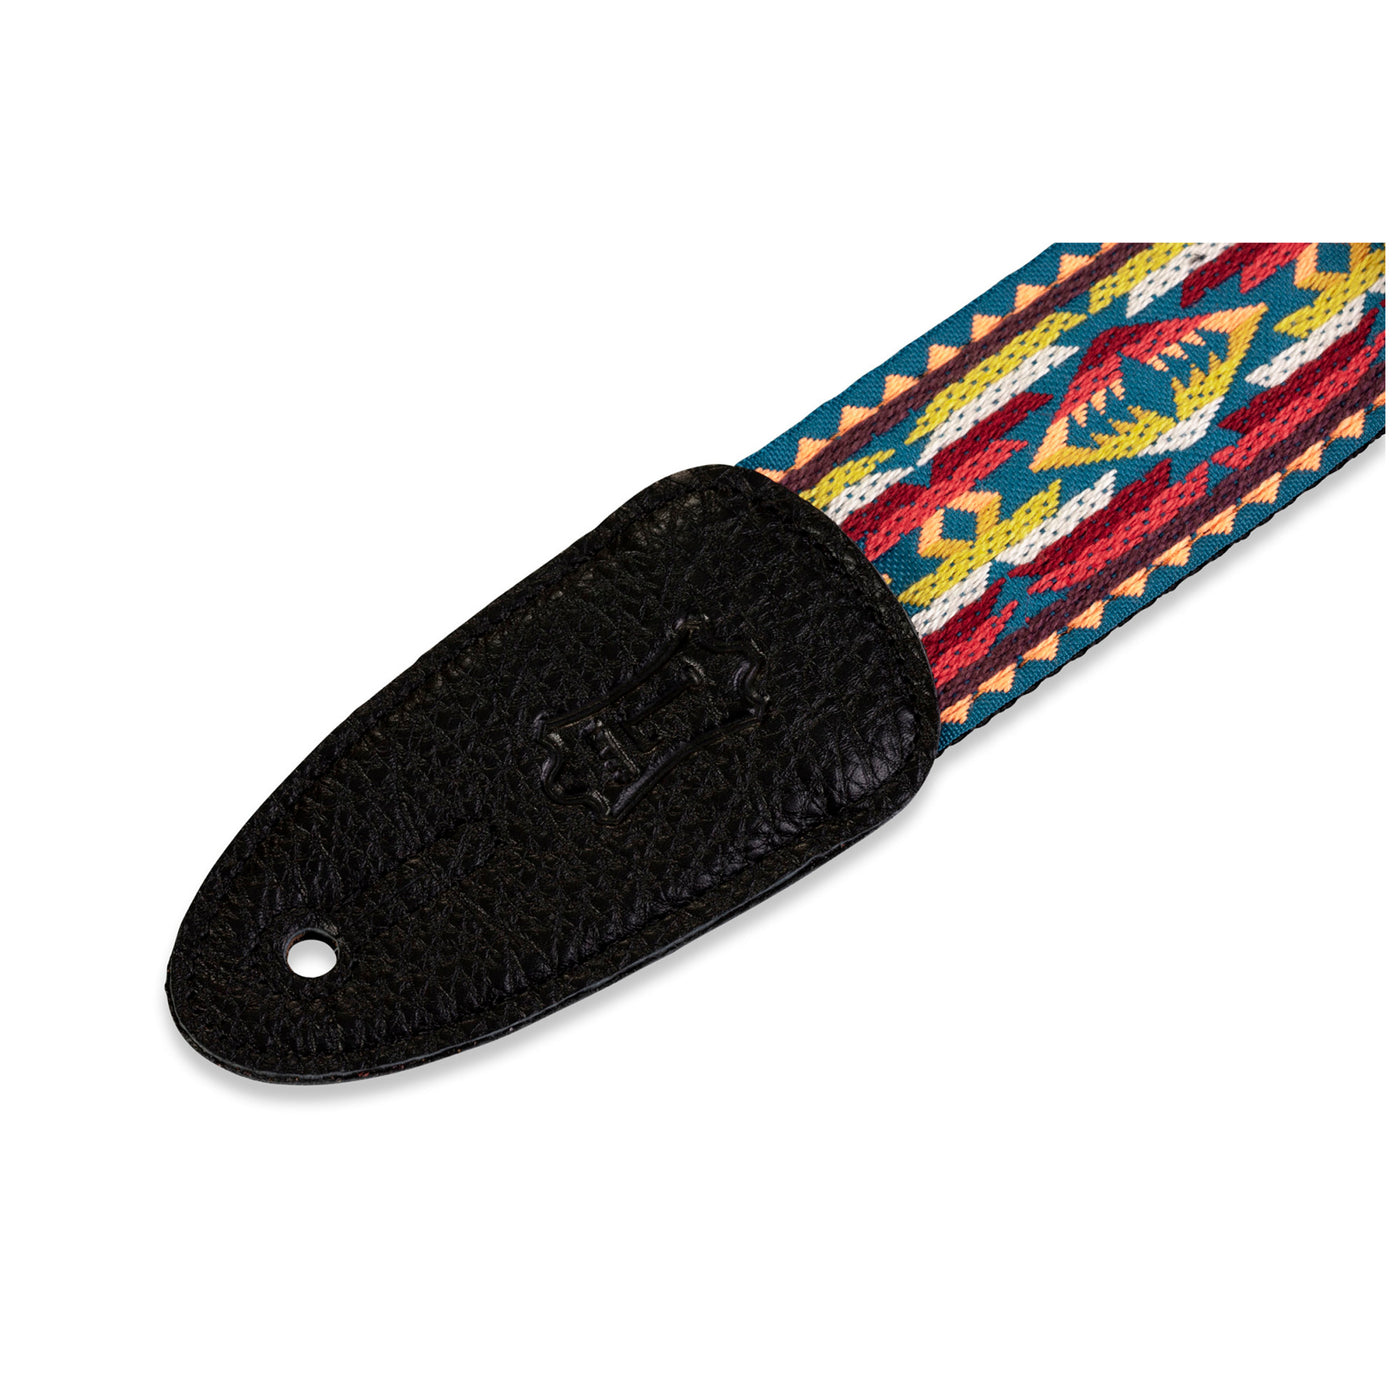 Levy's 2" Woven Strap in Calexico